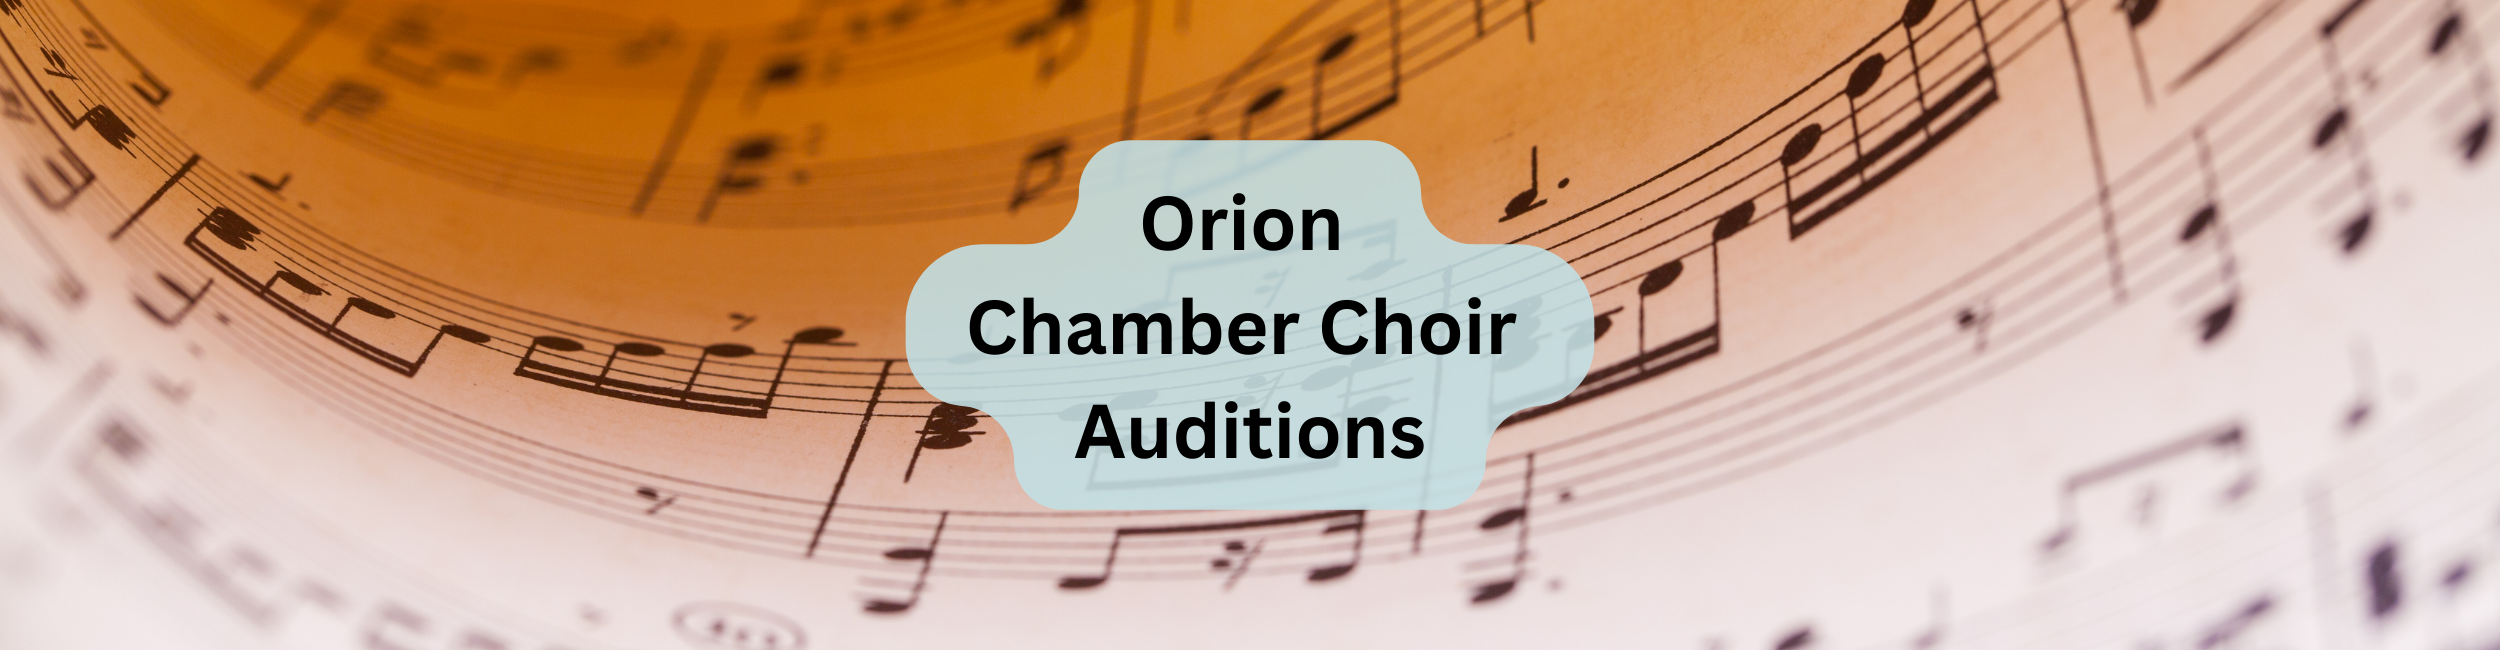 Orion Chamber Choir Auditions